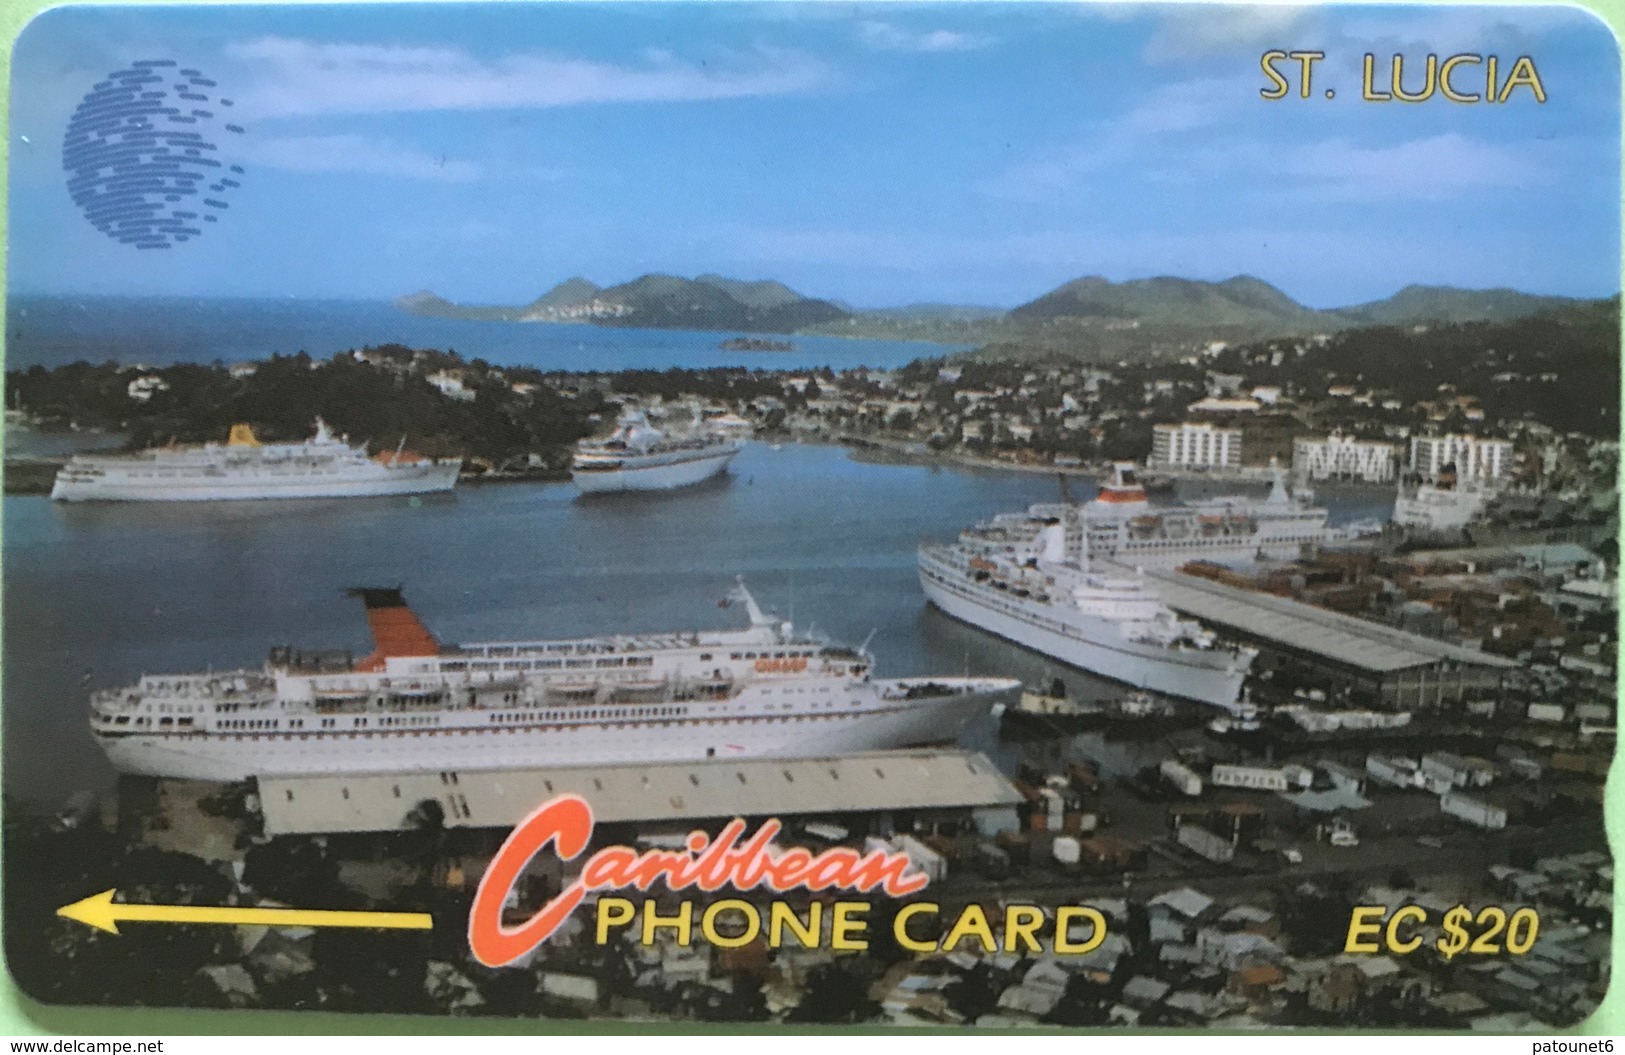 SAINTE LUCIE  -  Phonecard  - Cable & Wireless  - EC $ 20 - St. Lucia